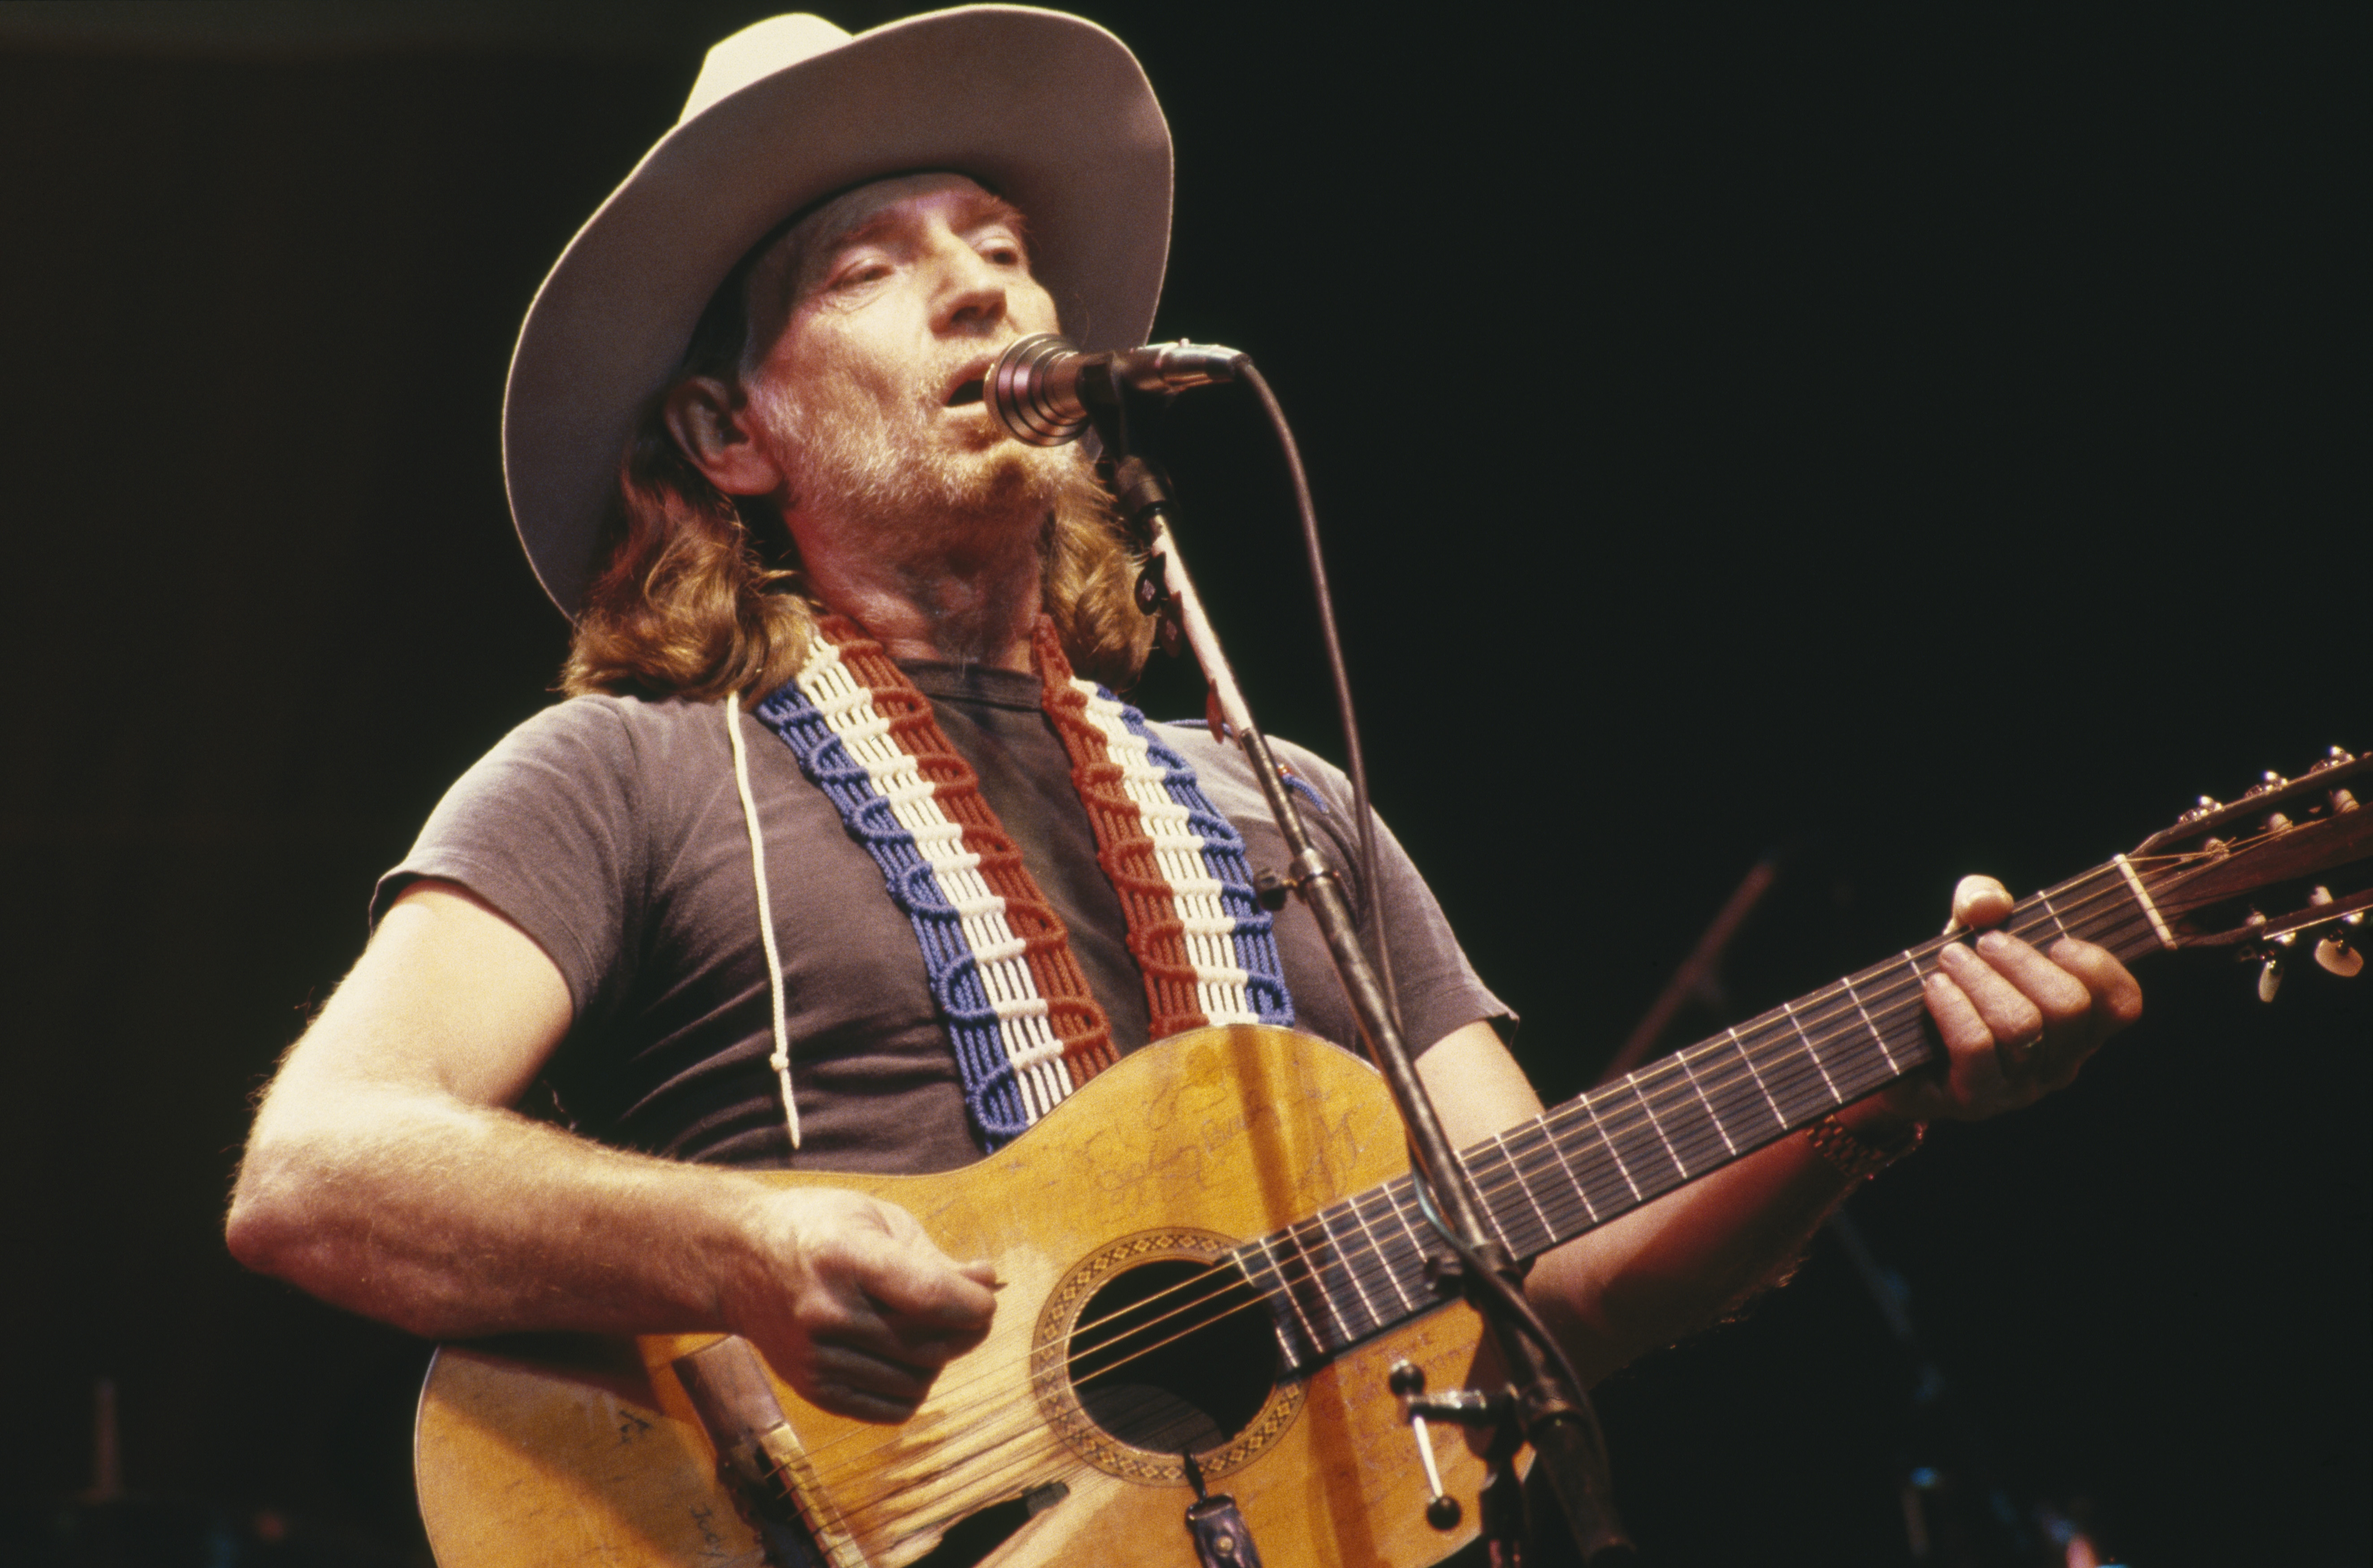 Willie Nelson performs during a concert, circa 1975 | Source: Getty Images